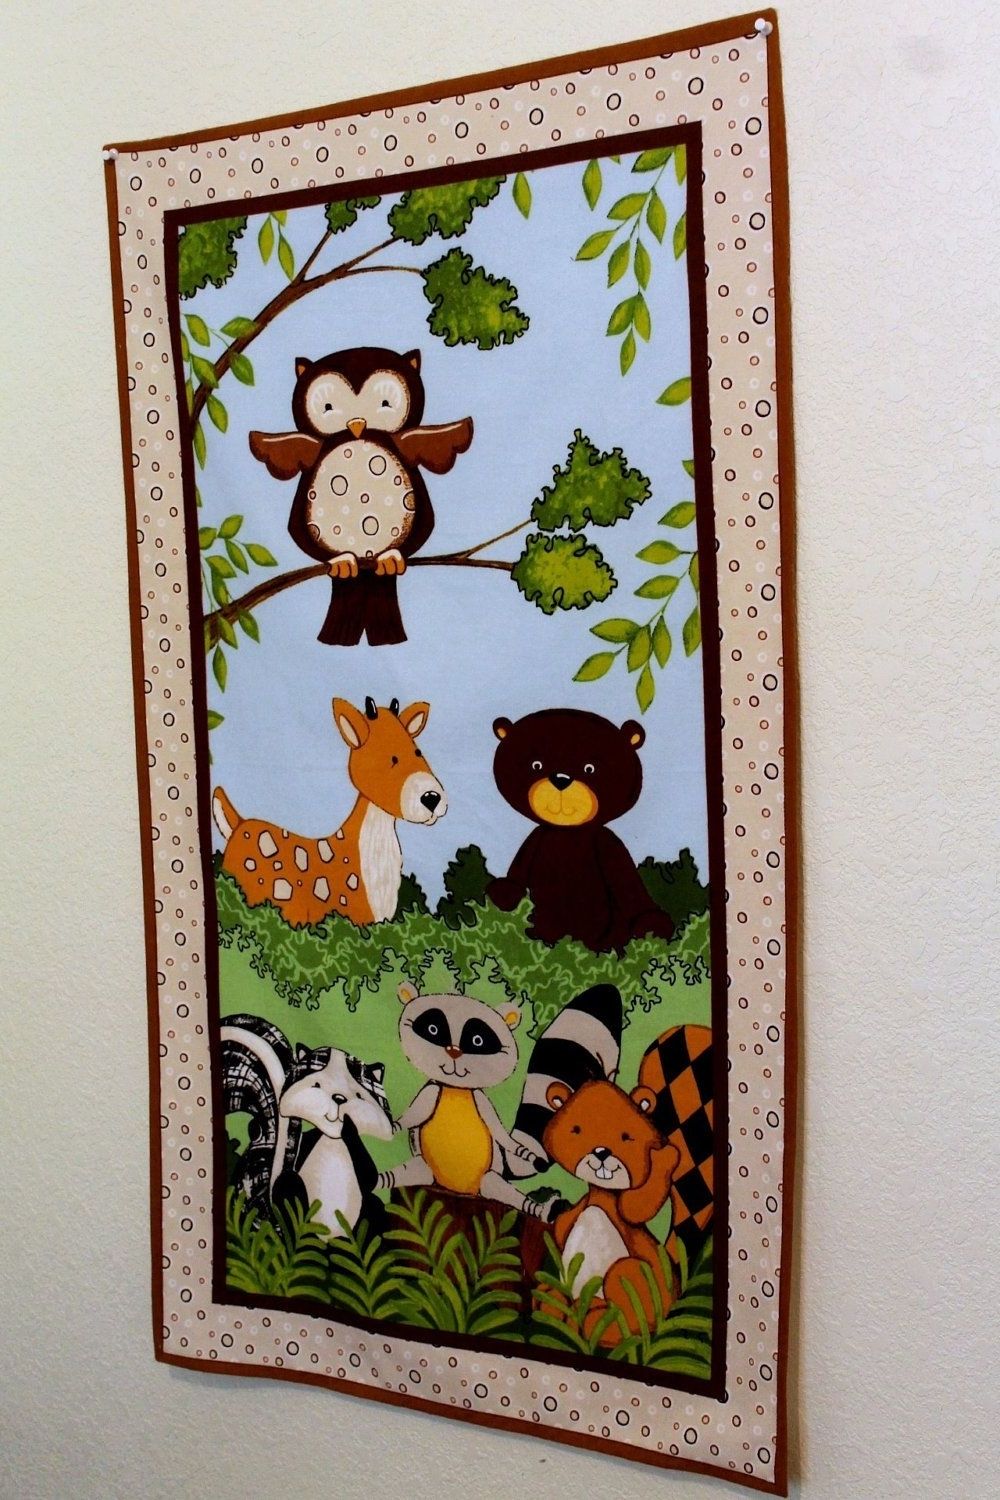 Favorite Wall Decor Woodland Animal Forest Creatures Flannel Fabric Panel Regarding Childrens Fabric Wall Art (View 2 of 15)